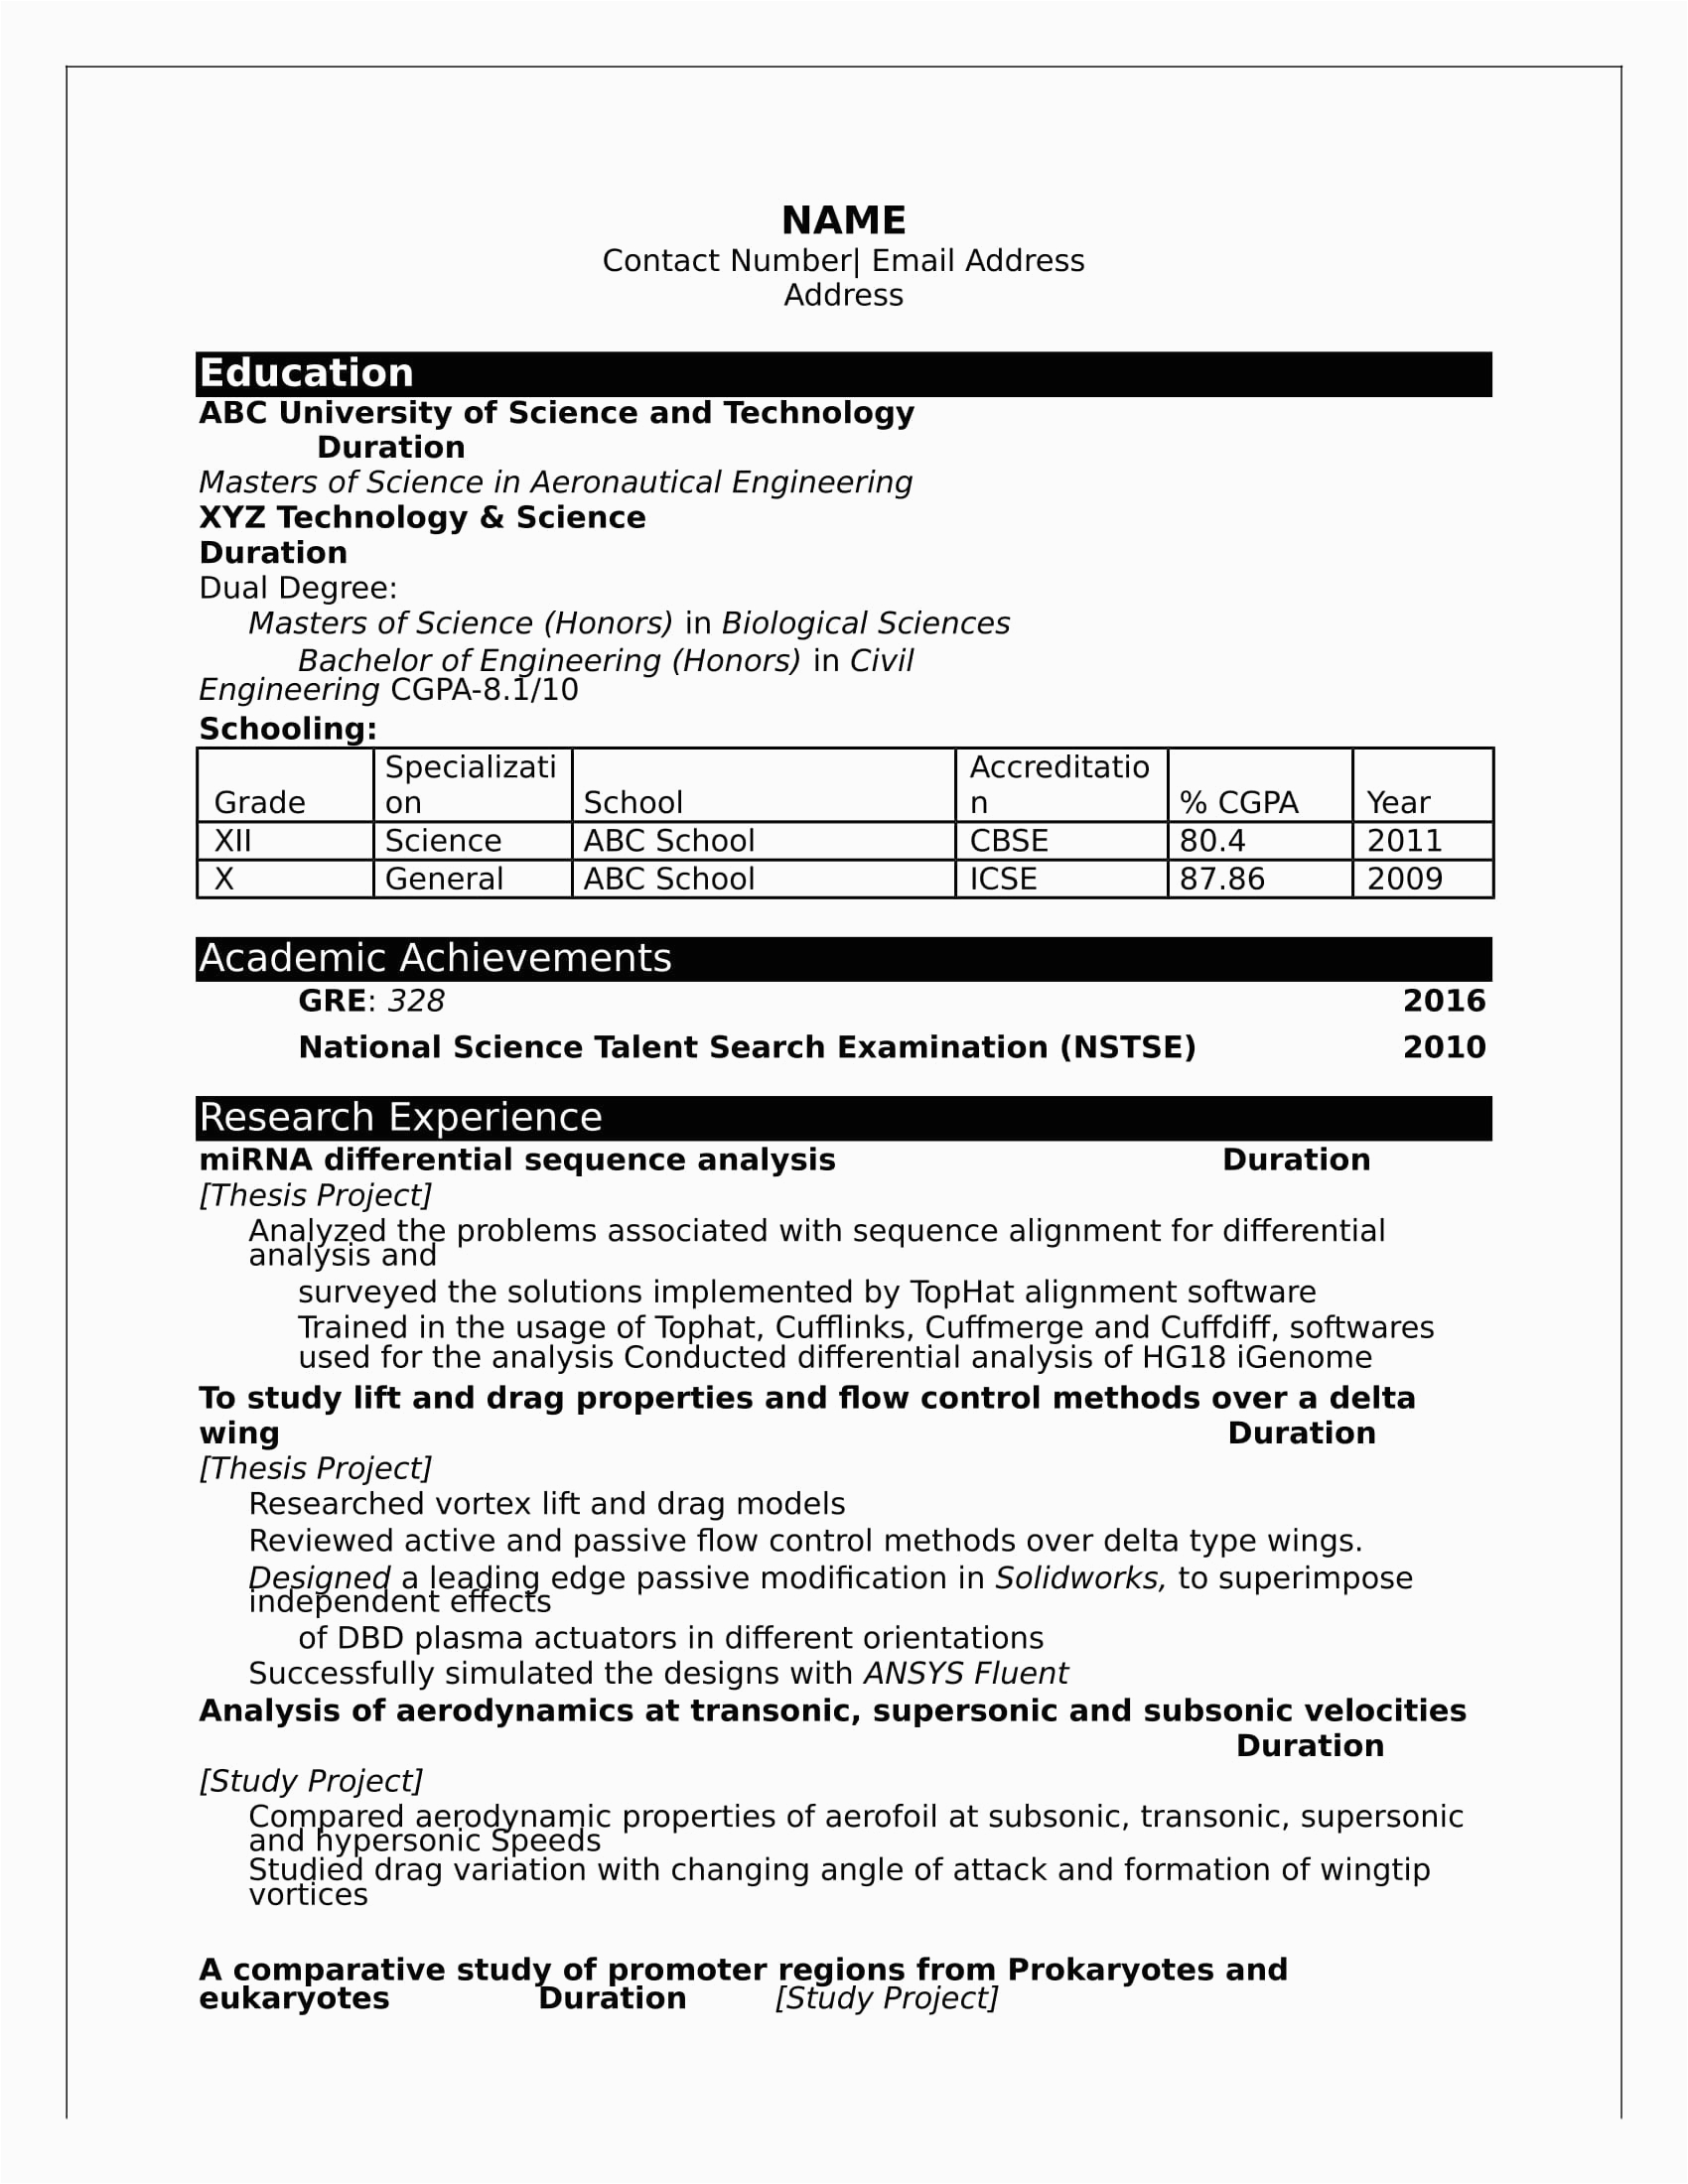 Content Writing Resume Samples for Freshers Resume format for Freshers Ece Engineers Free Download Resume